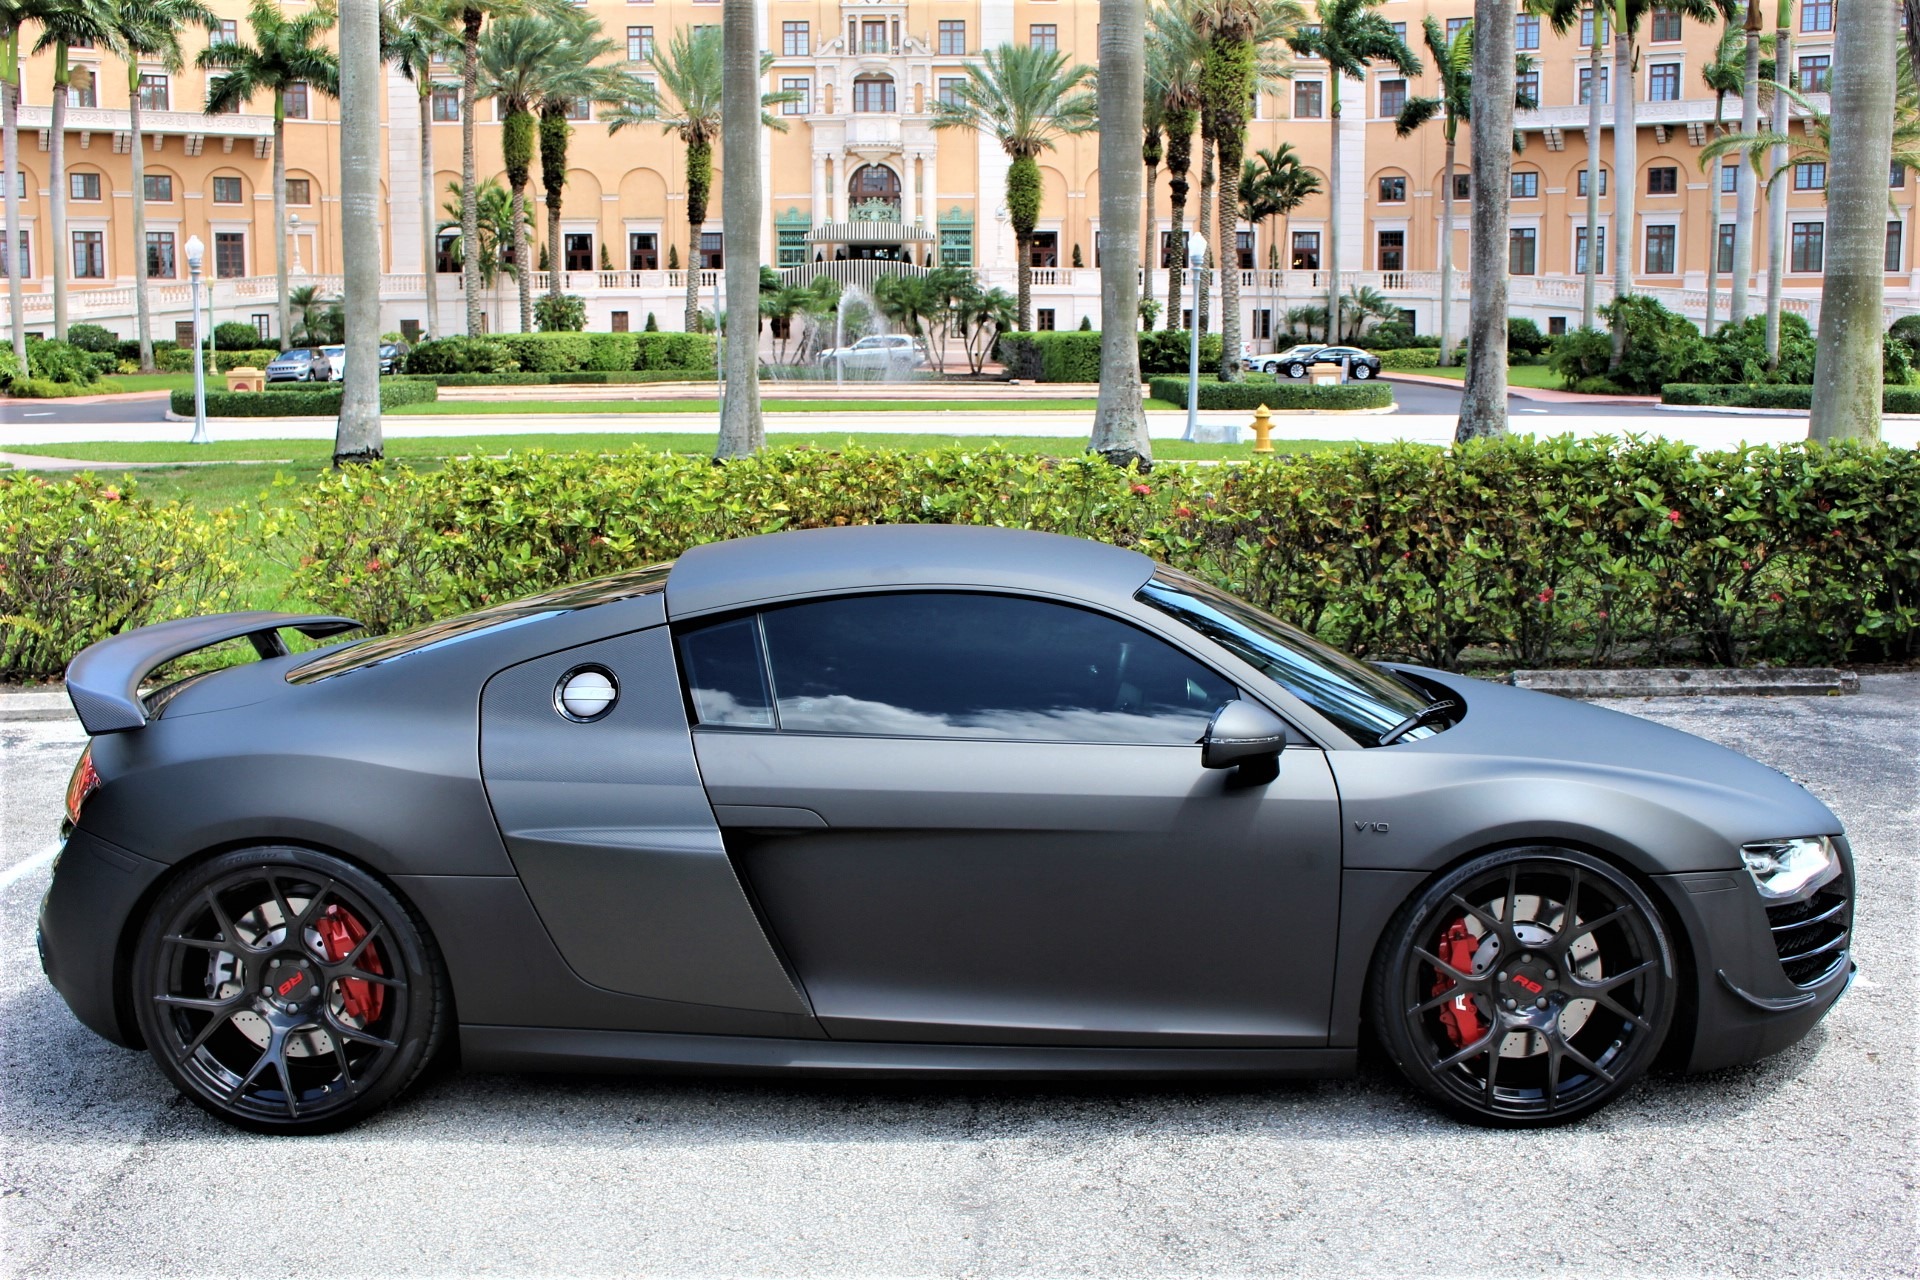 Used 2012 Audi R8 5.2 quattro for sale Sold at The Gables Sports Cars in Miami FL 33146 2